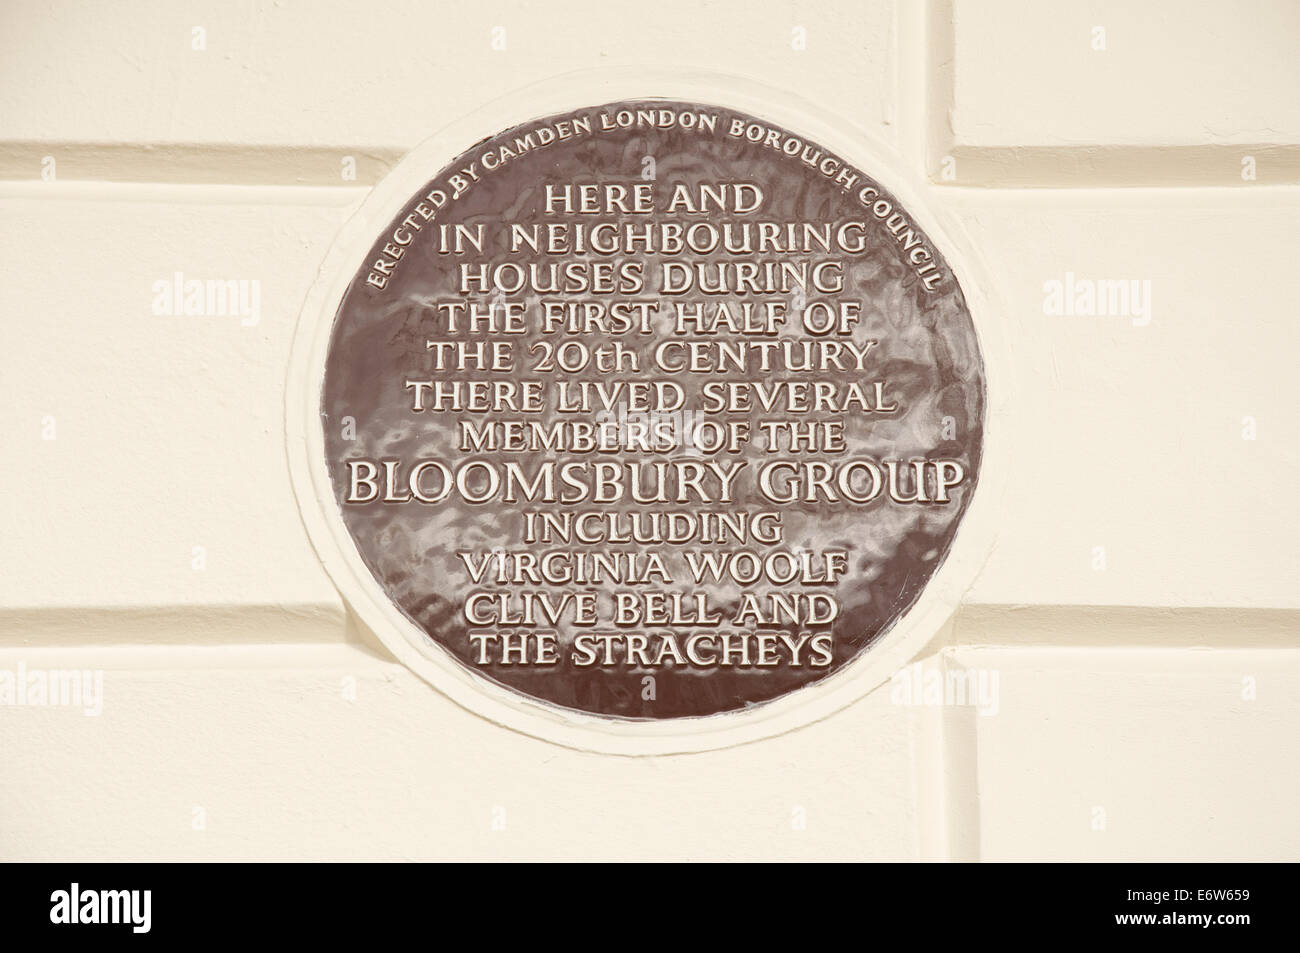 A ceramic plaque at 50 Gordon Square, in Camden, which was home to several members of the Bloomsbury group including Virginia Woolf. London, England. Stock Photo